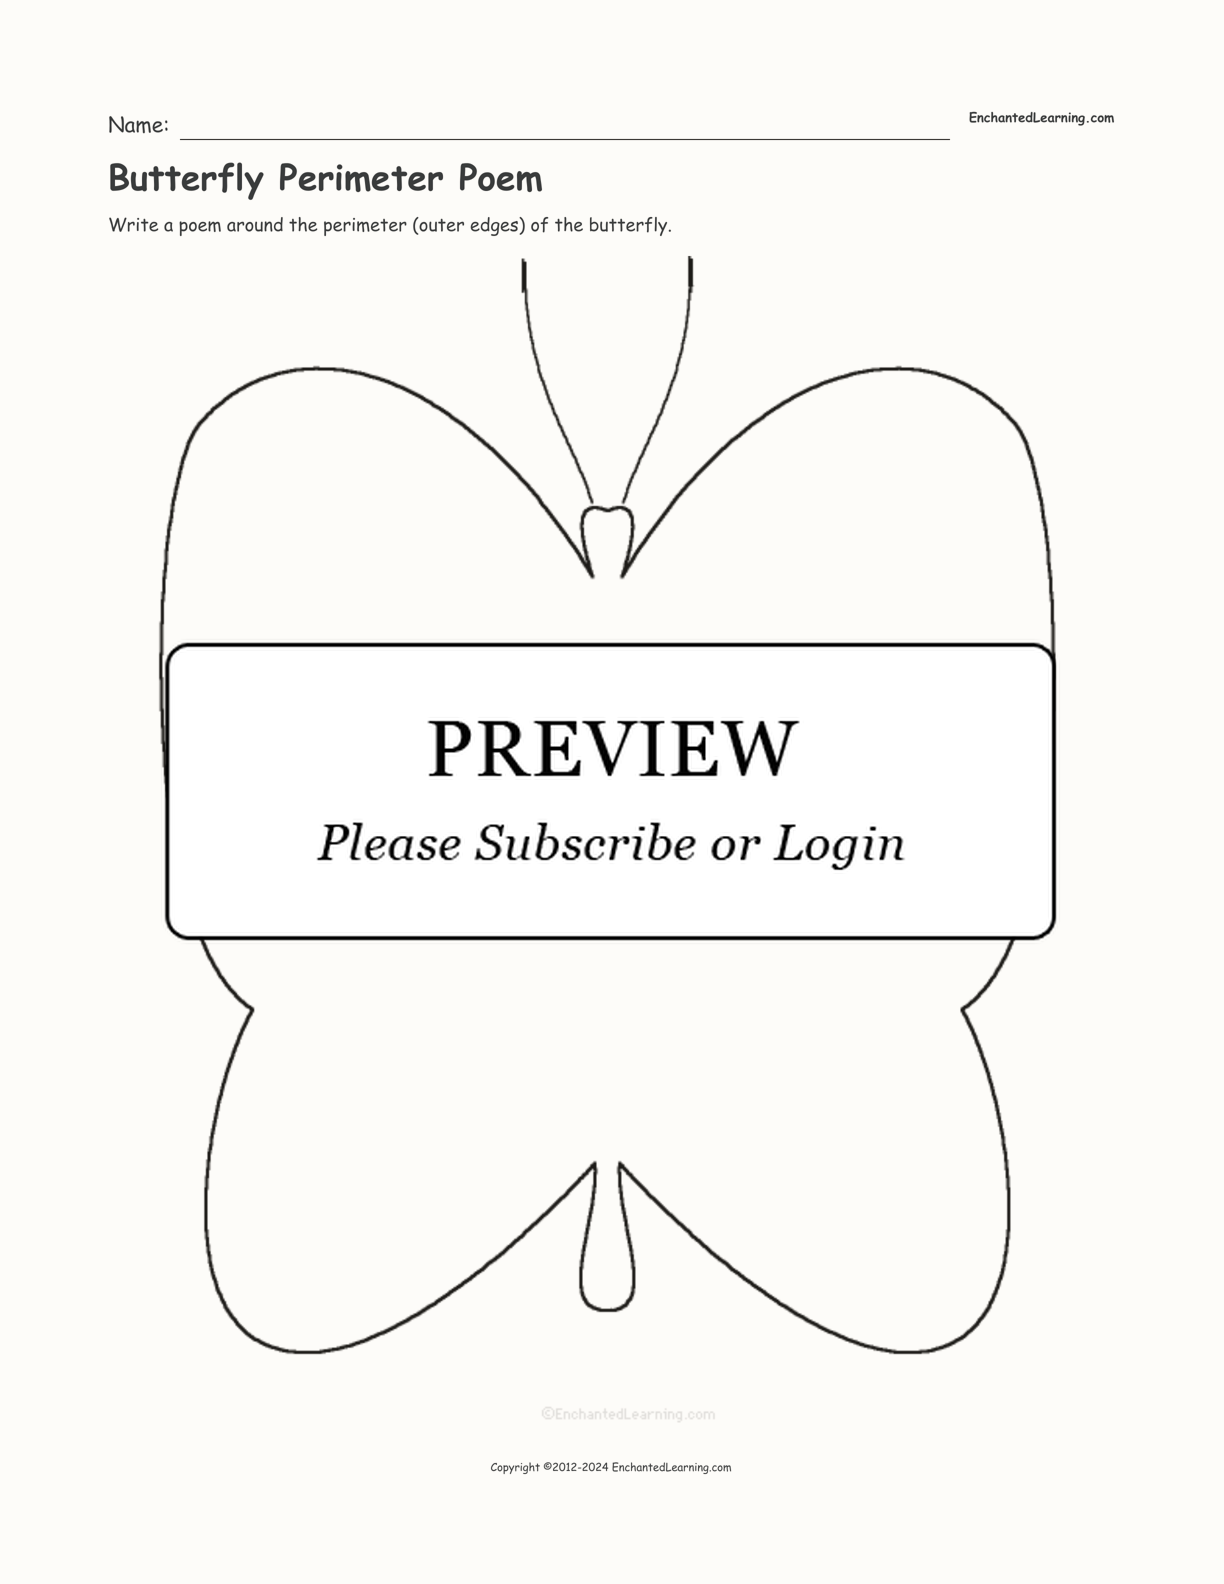 Butterfly Perimeter Poem interactive worksheet page 1